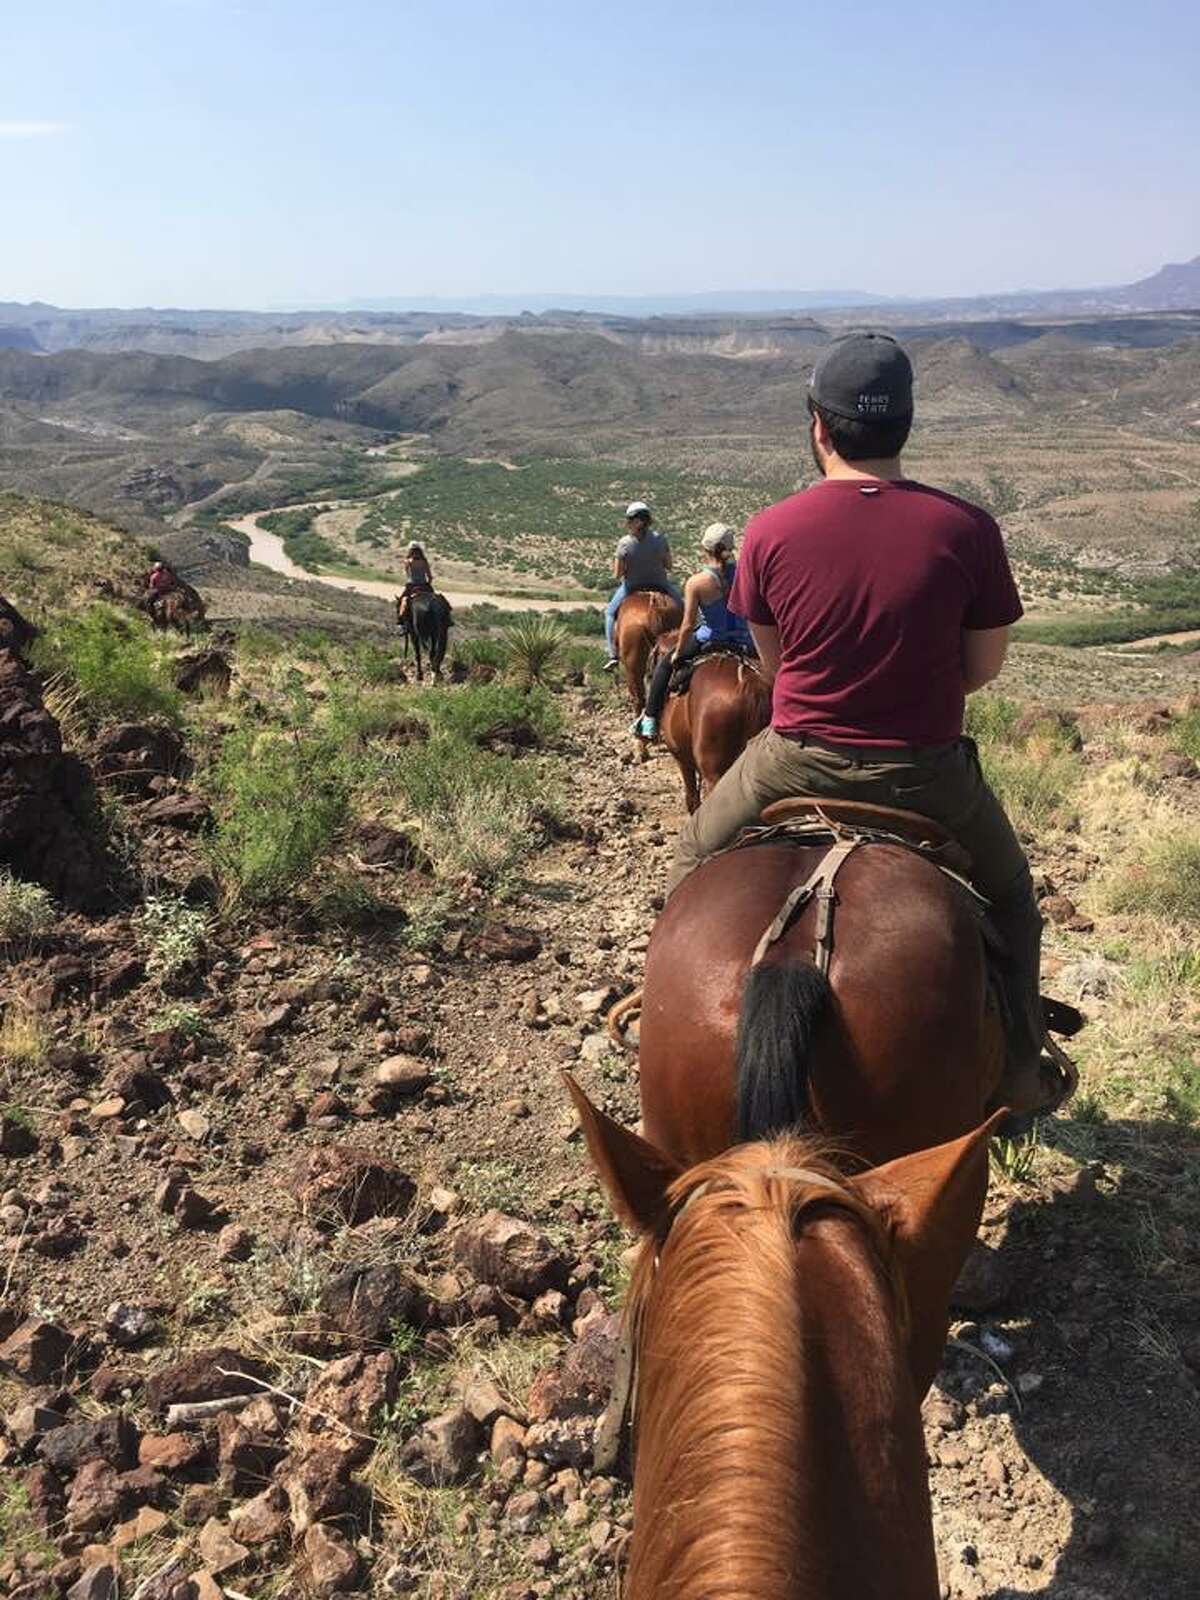 The horses rode over rocky terrain as mass communication students from Texas State University explored Big Bend Ranch State Park.